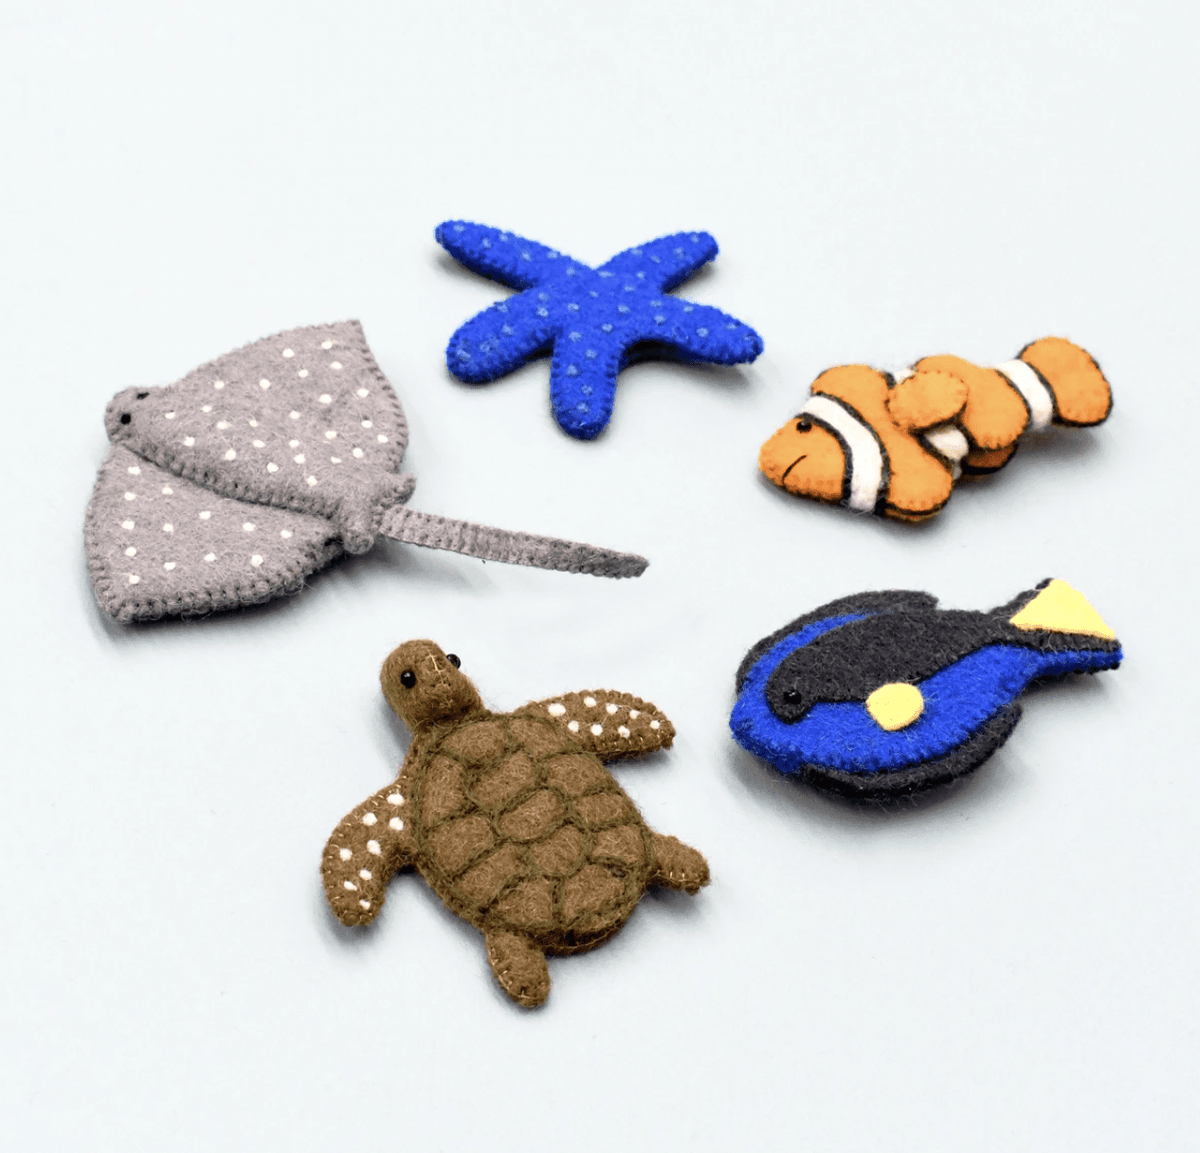 The Curated Parcel - Felt Finger Puppet - Australian Coral Reef Under The Sea 